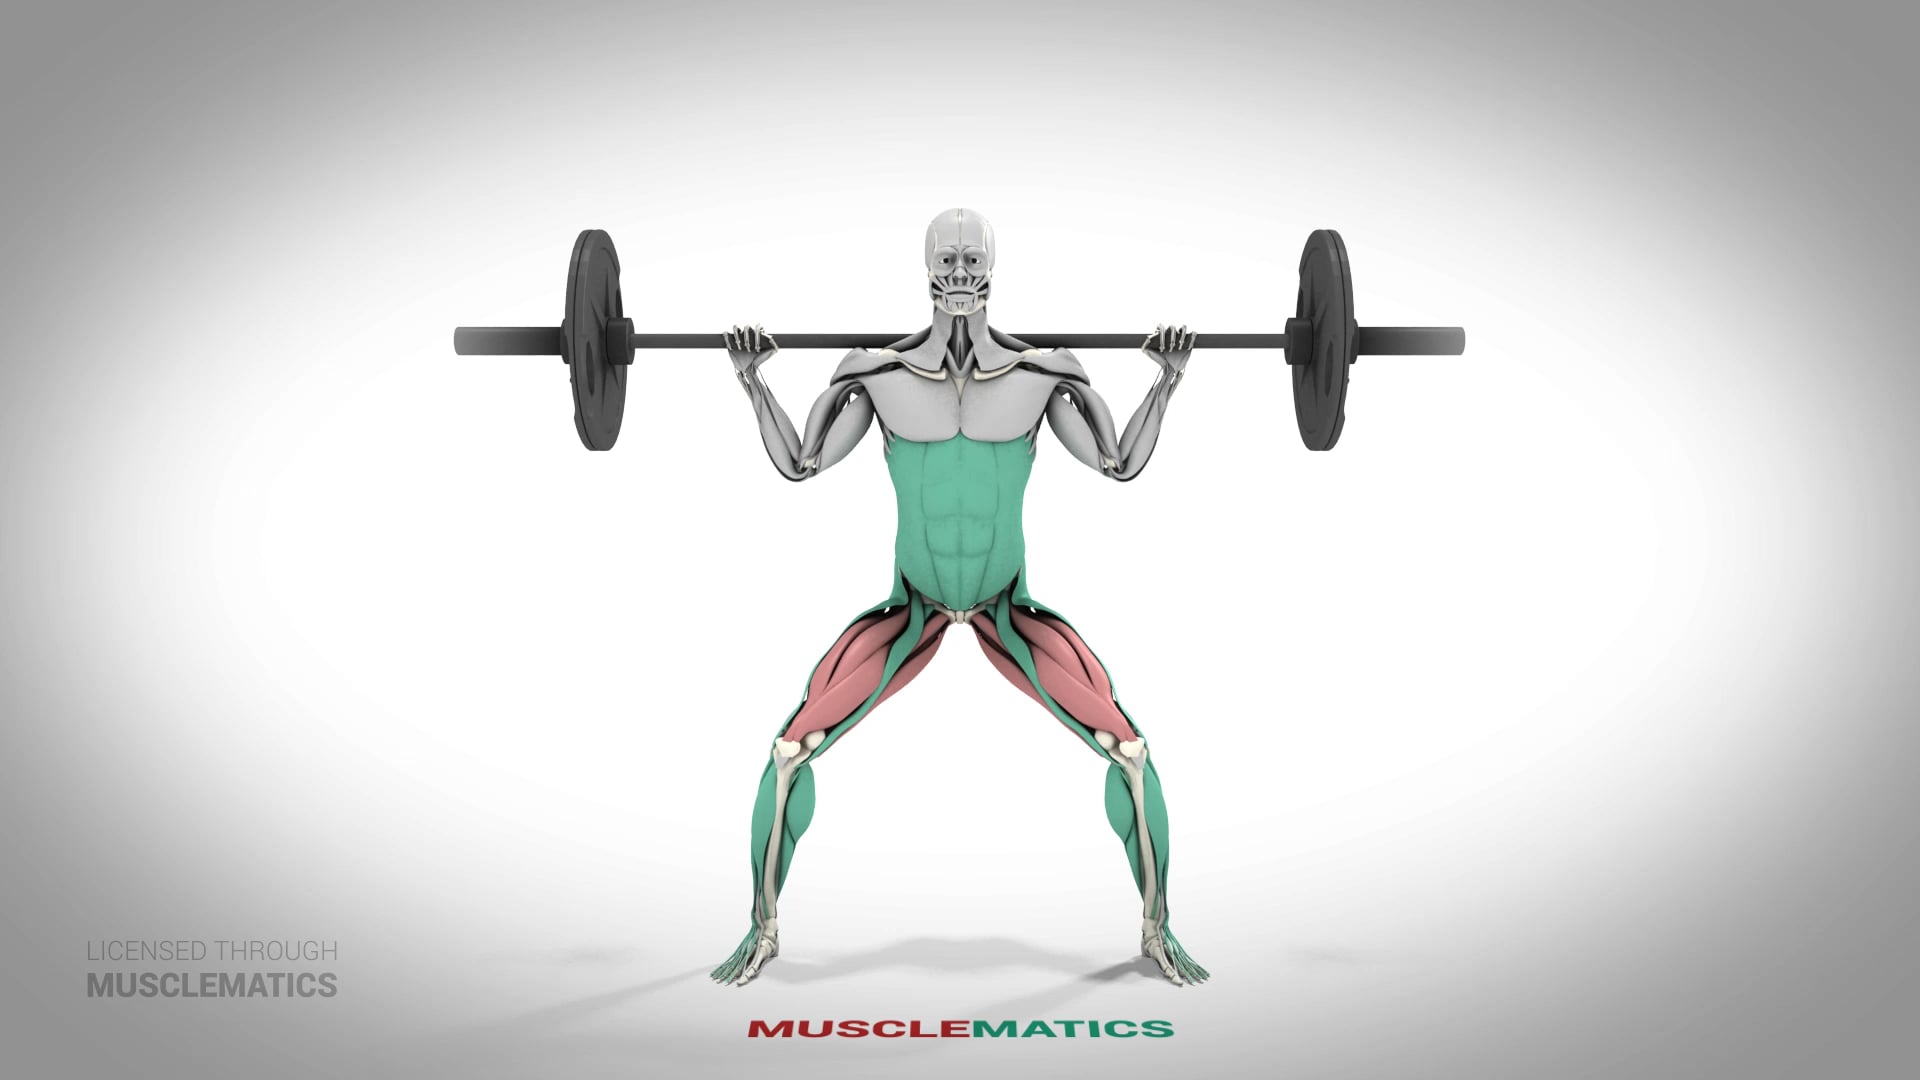 musclematics vs imuscle 2 reddit